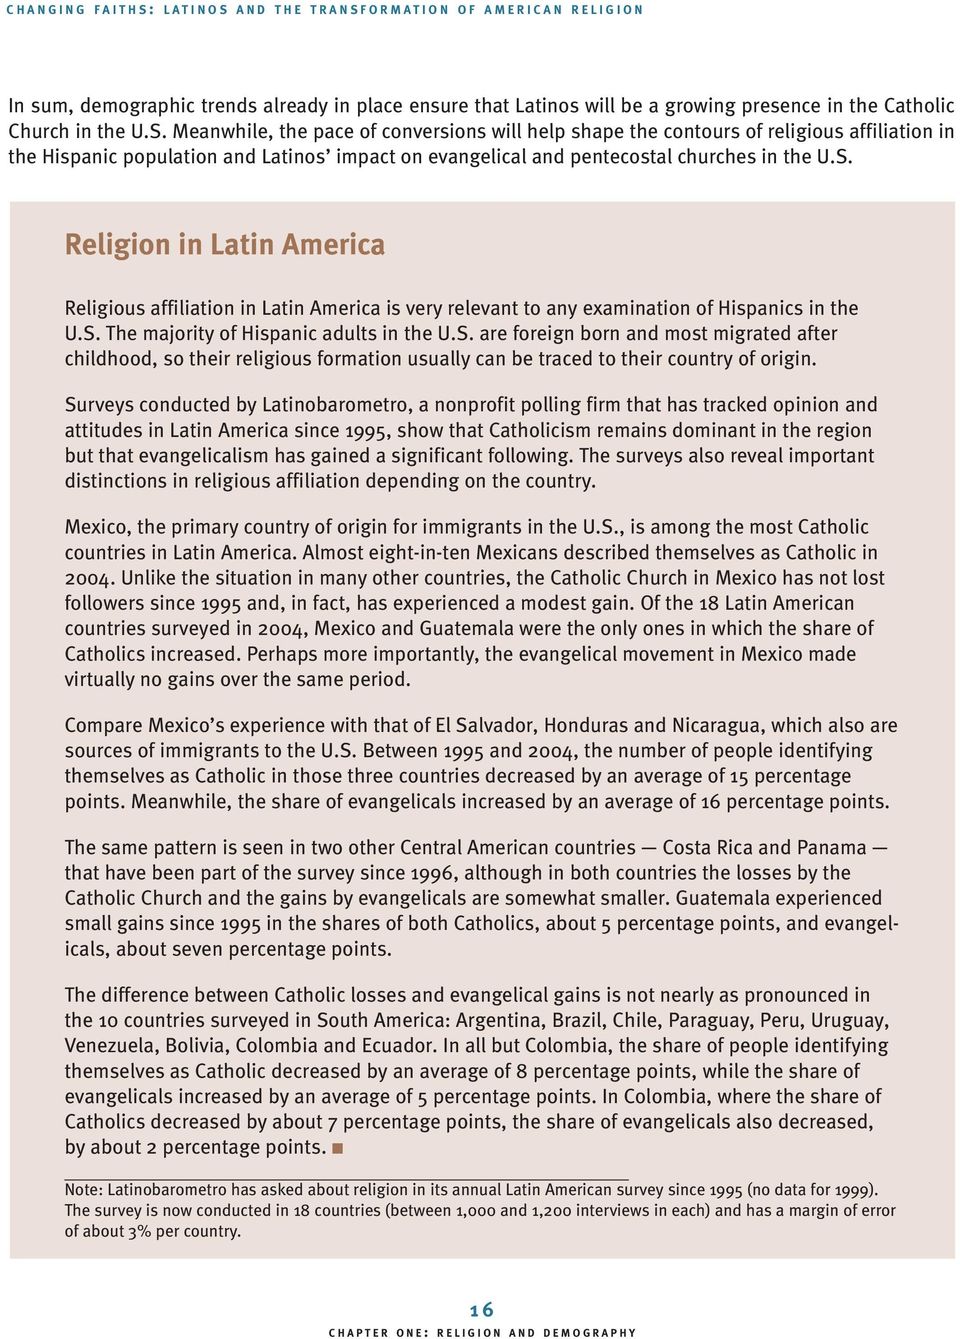 Religion in Latin America Religious affiliation in Latin America is very relevant to any examination of Hispanics in the U.S.